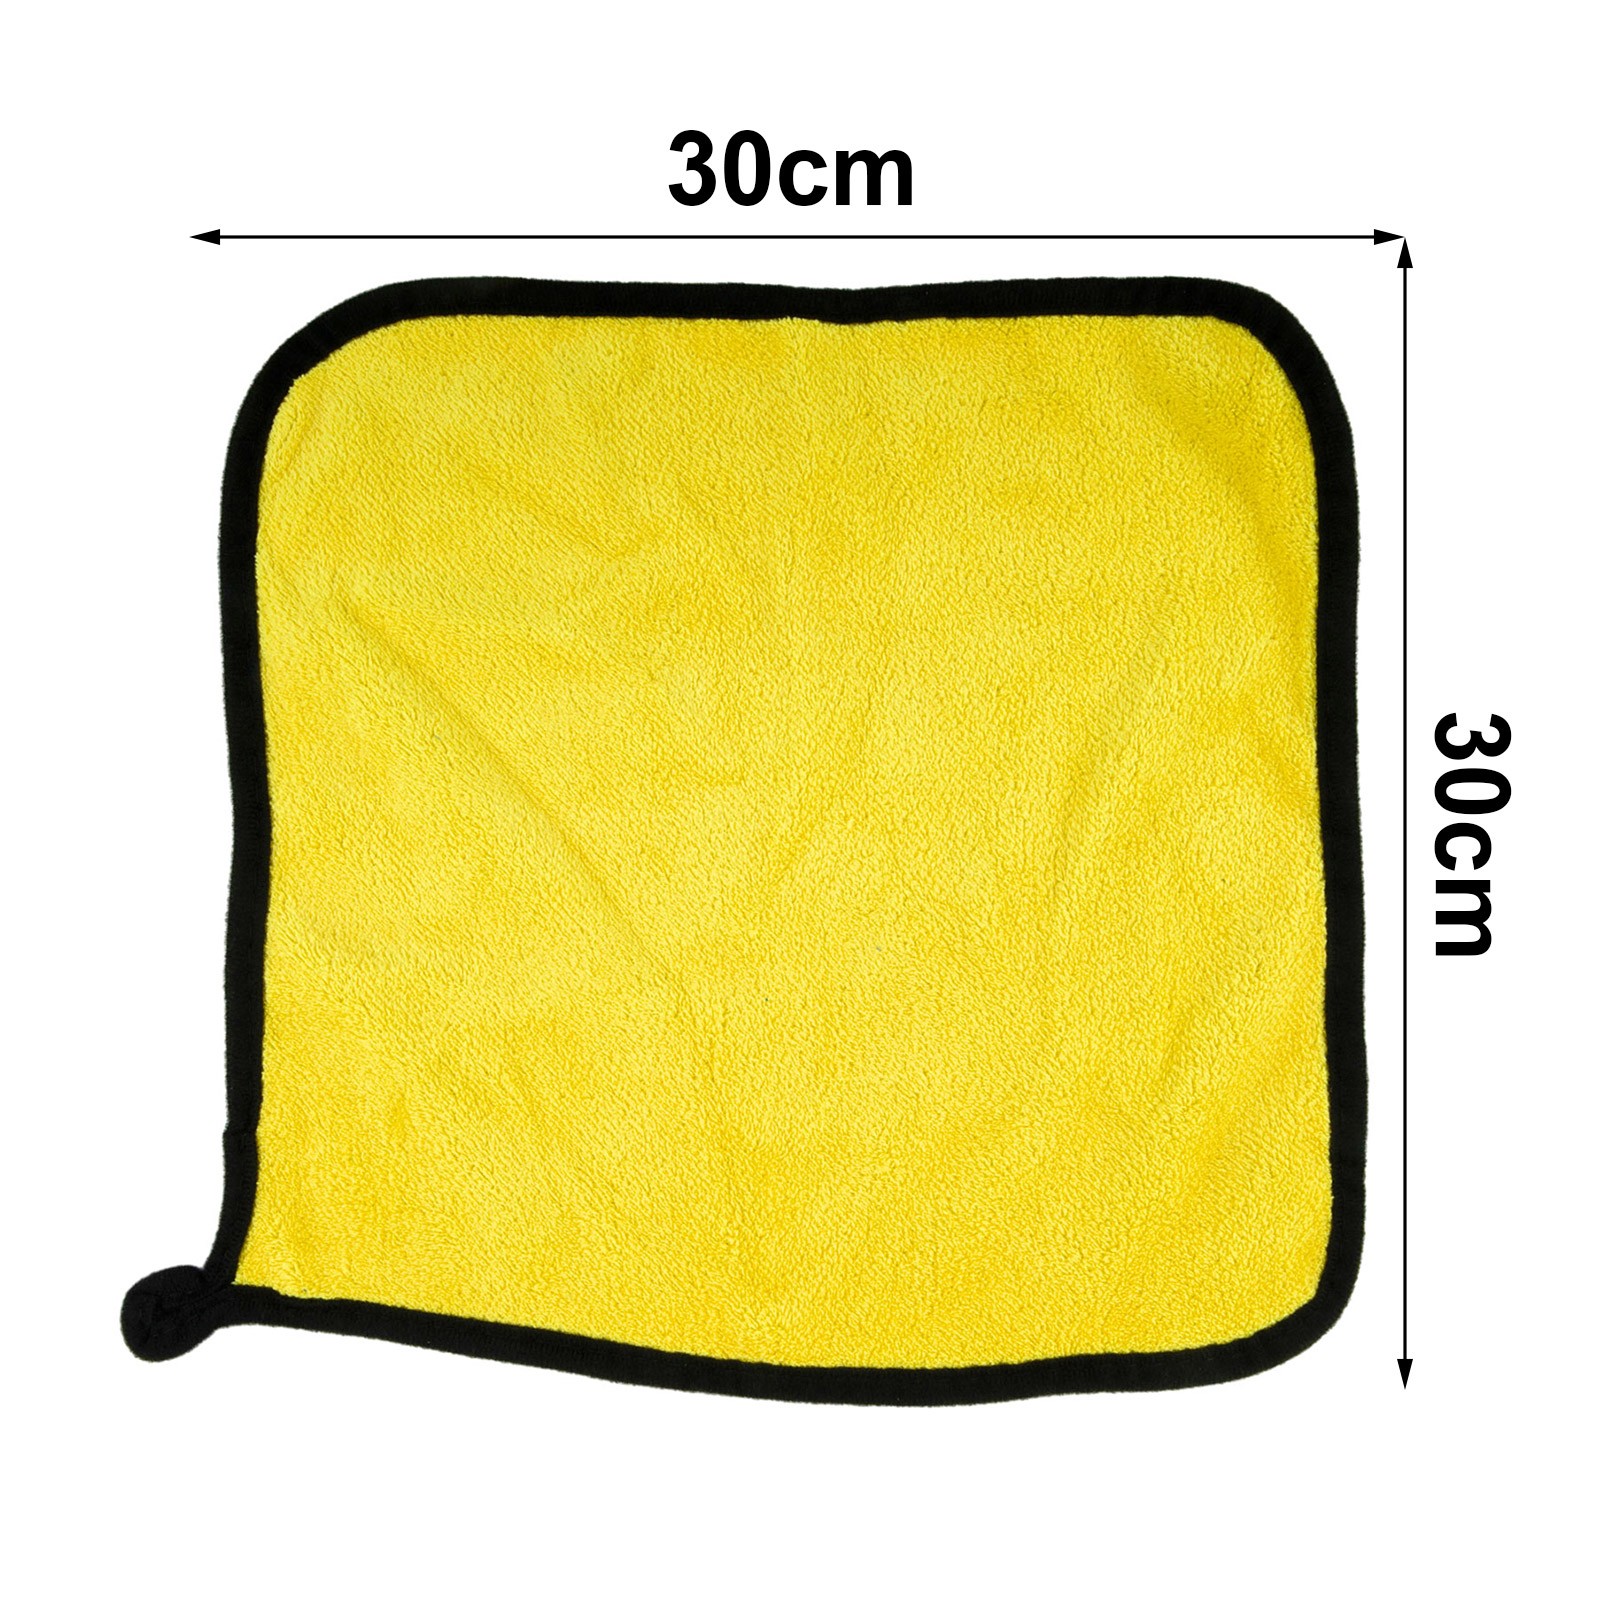 Durable Bait Towel for Fishing Designed to Withstand Outdoor Conditions